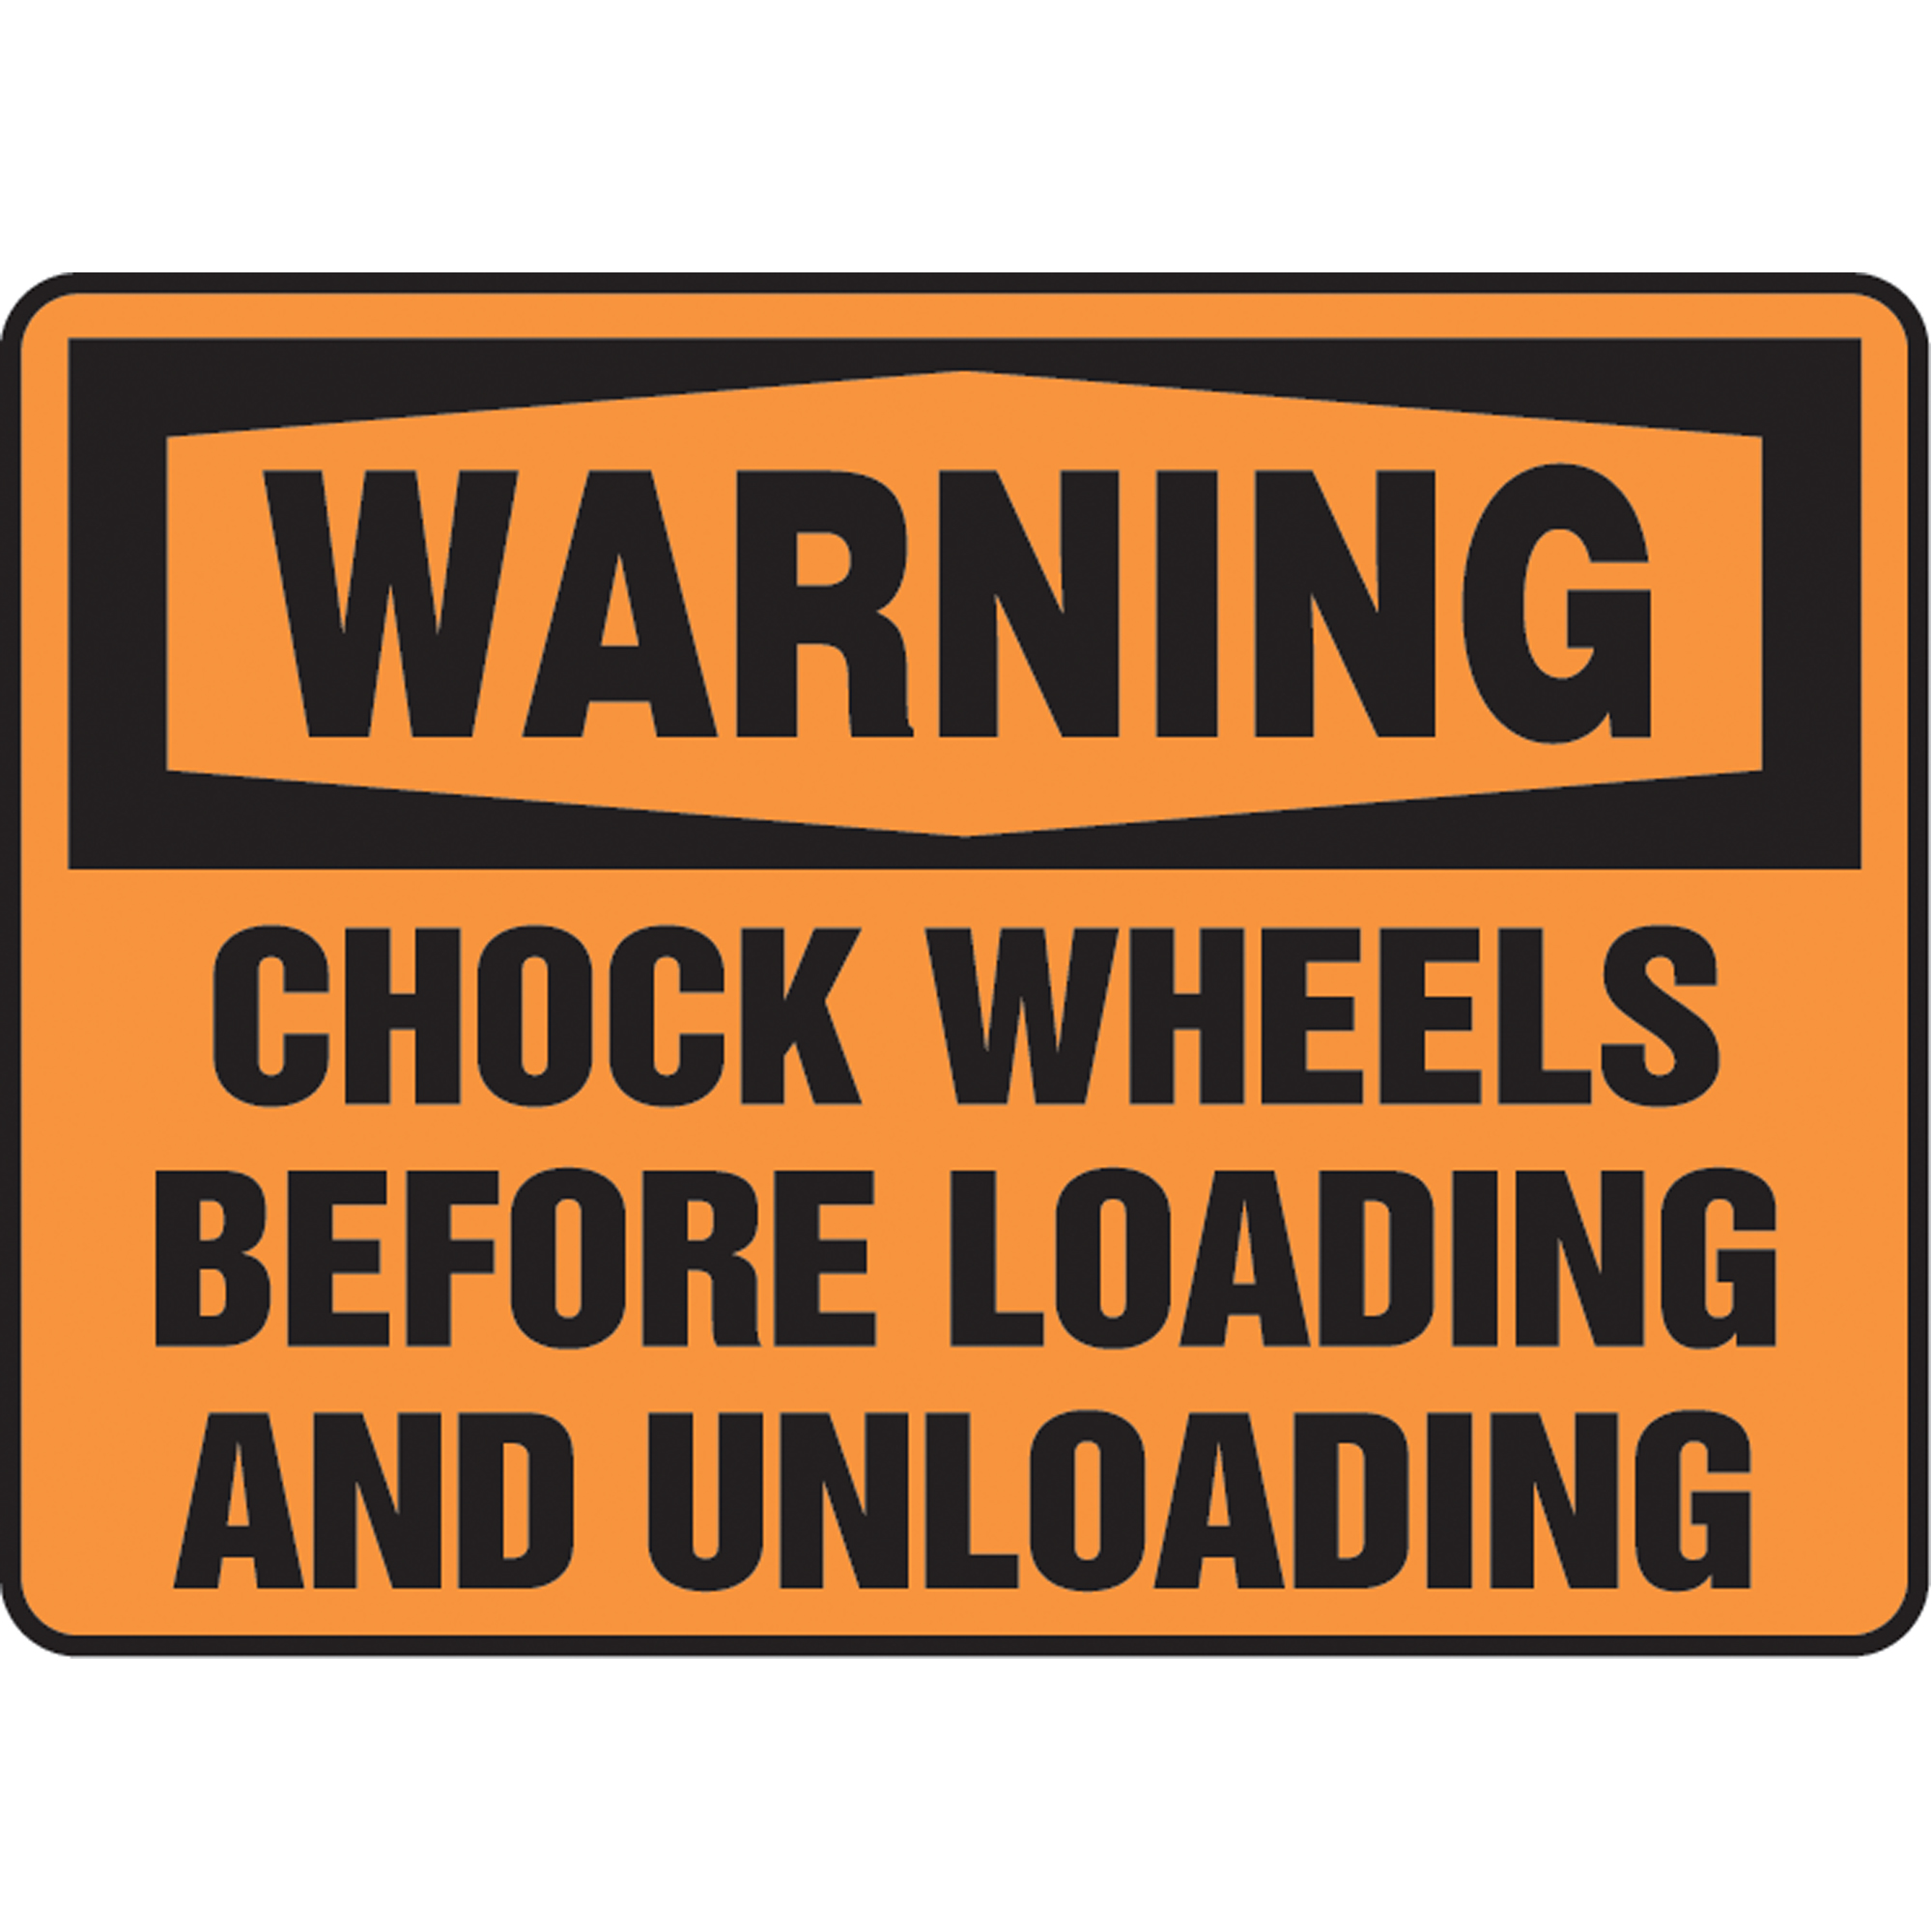 AccuformWarning Chock Wheels Before Loading and Unloading Safety Sign Accu-Shield MTKC302XP 7 x 10 Inches 